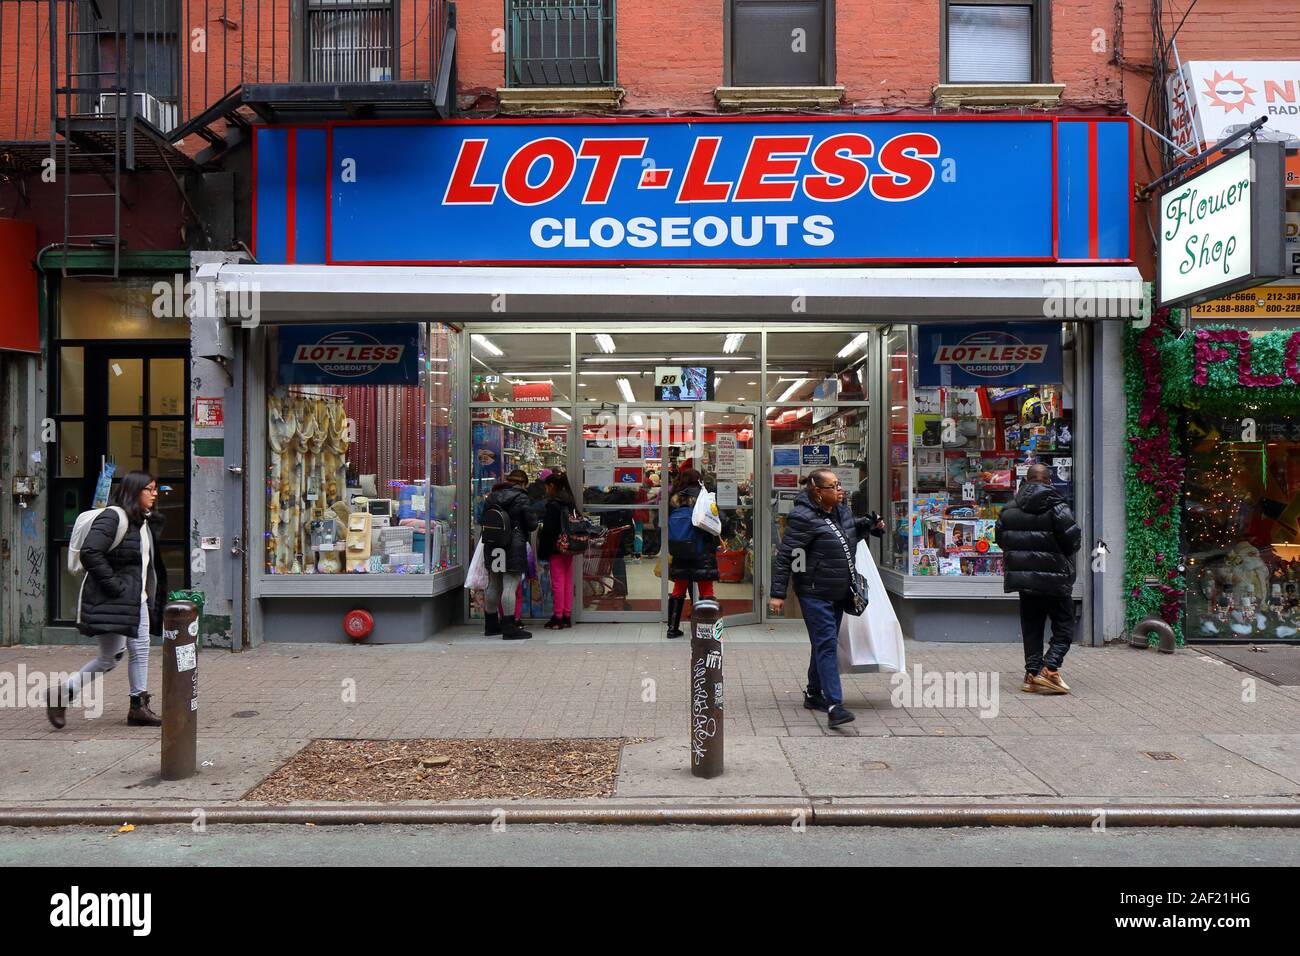 Lot-Less Closeouts, 80 Clinton Street, New York, NY. exterior storefront of a discount retailer in the Lower East Side neighborhood of Manhattan. Stock Photo